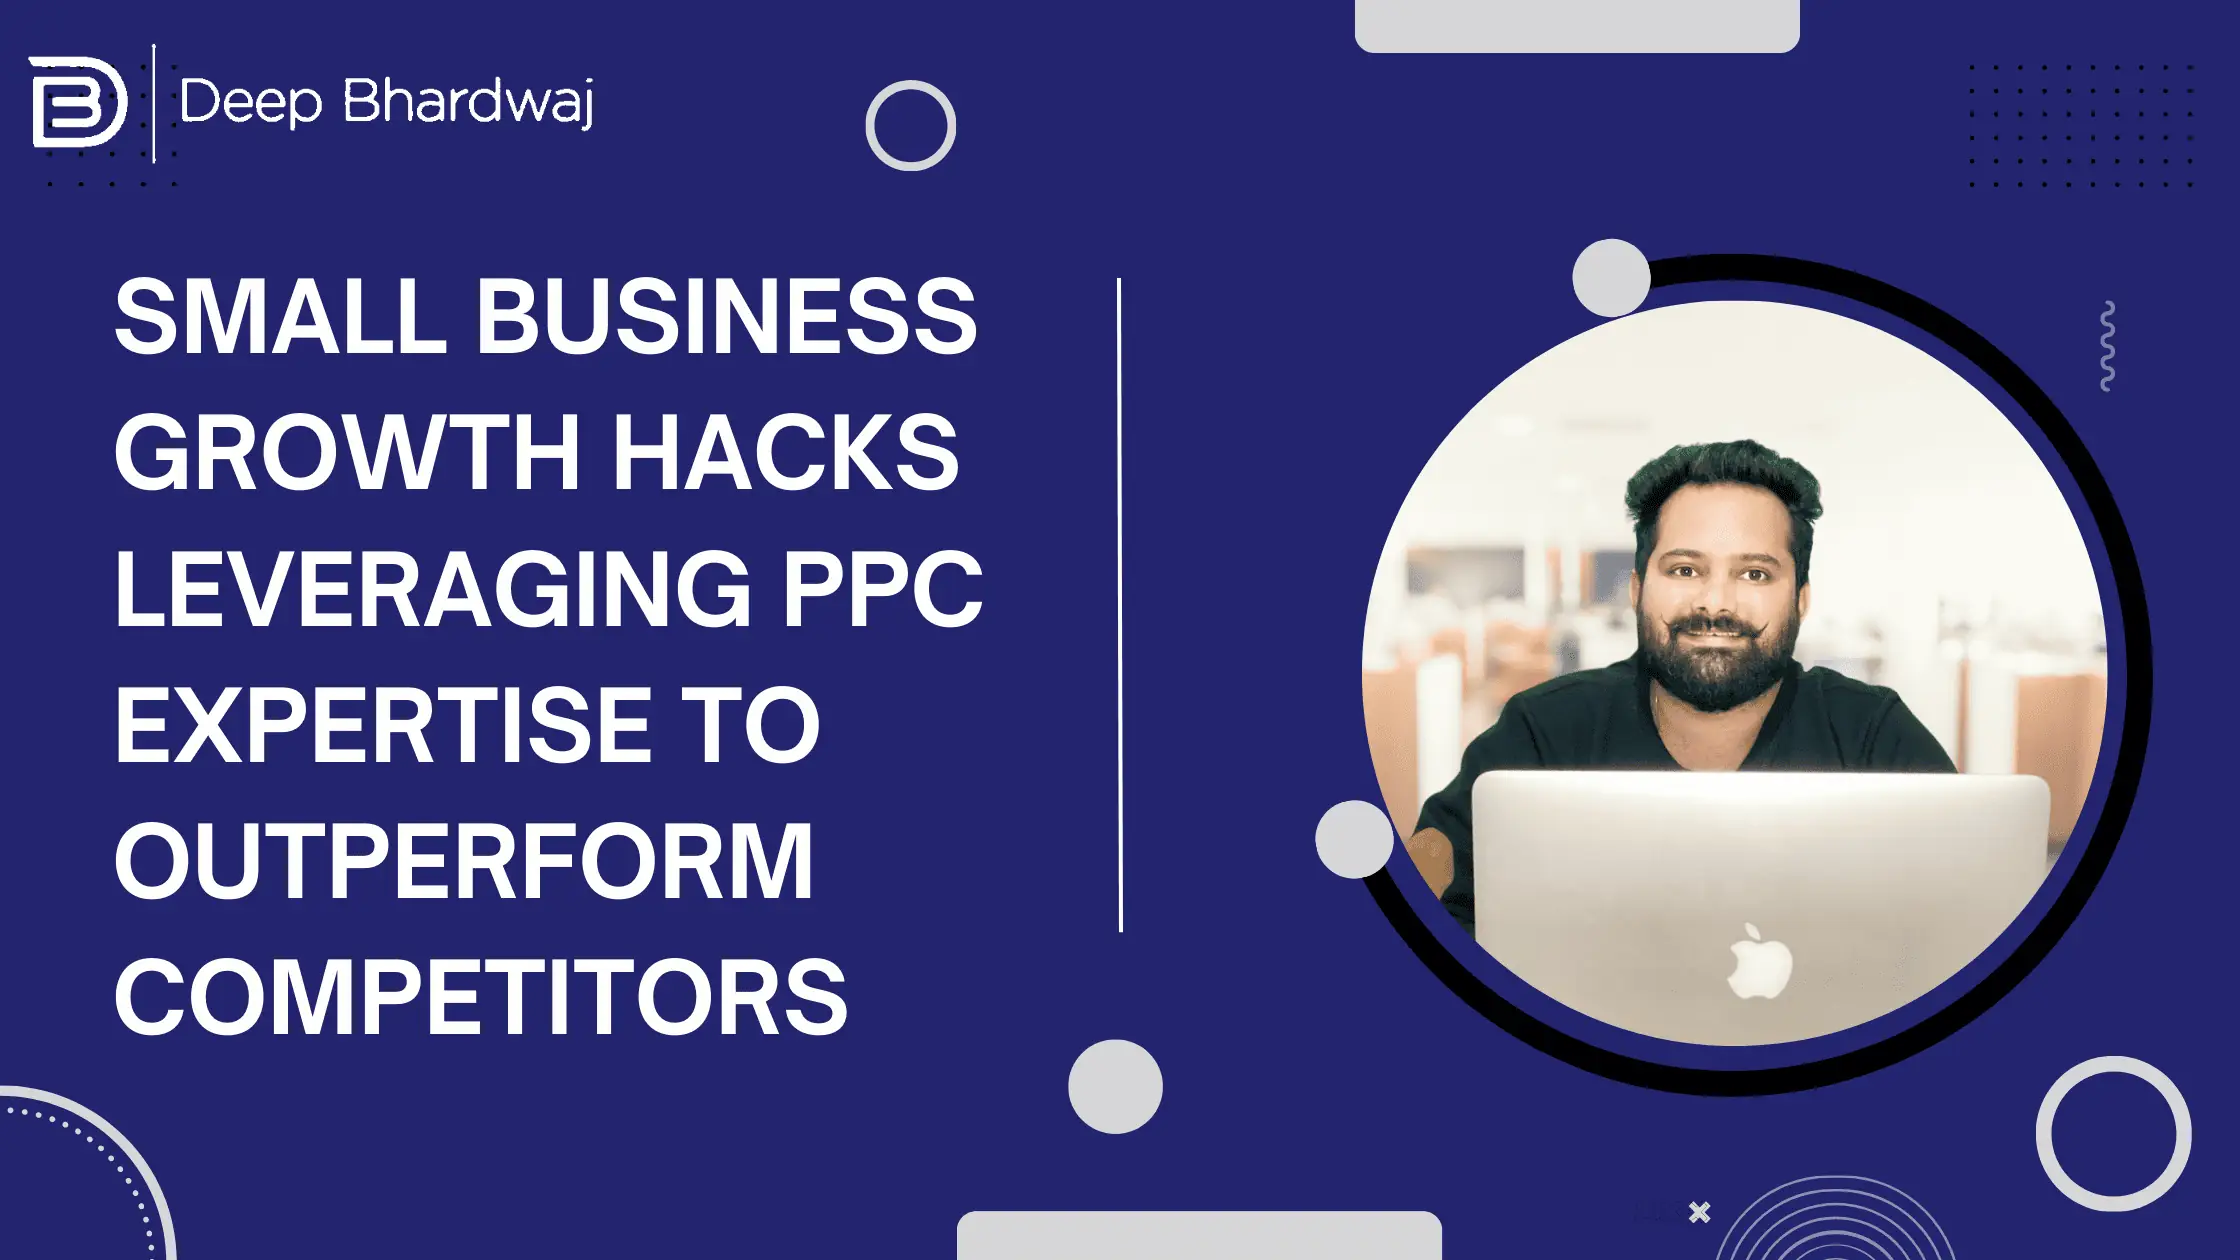 Small Business Growth Hacks Leveraging PPC Expertise to Outperform Competitors